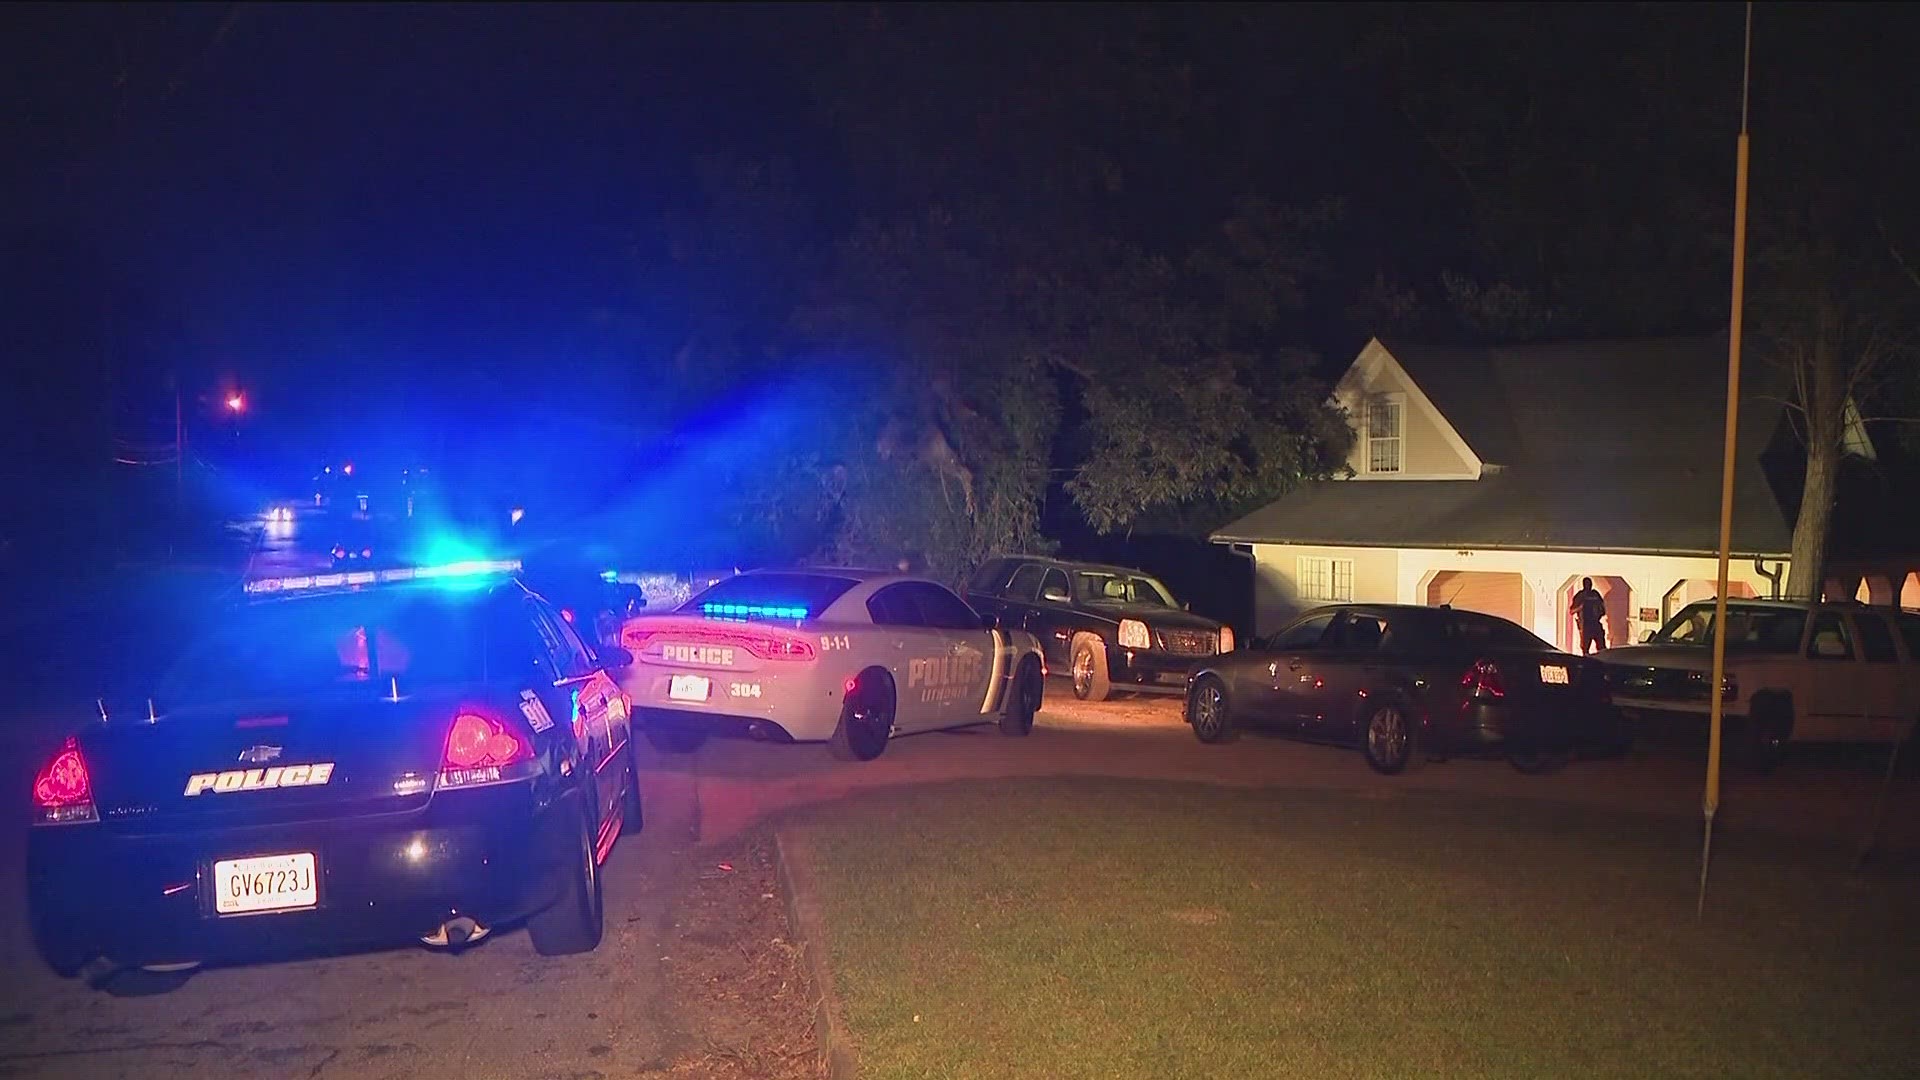 The shooting happened at a home along Rock Chapel Road, police said.